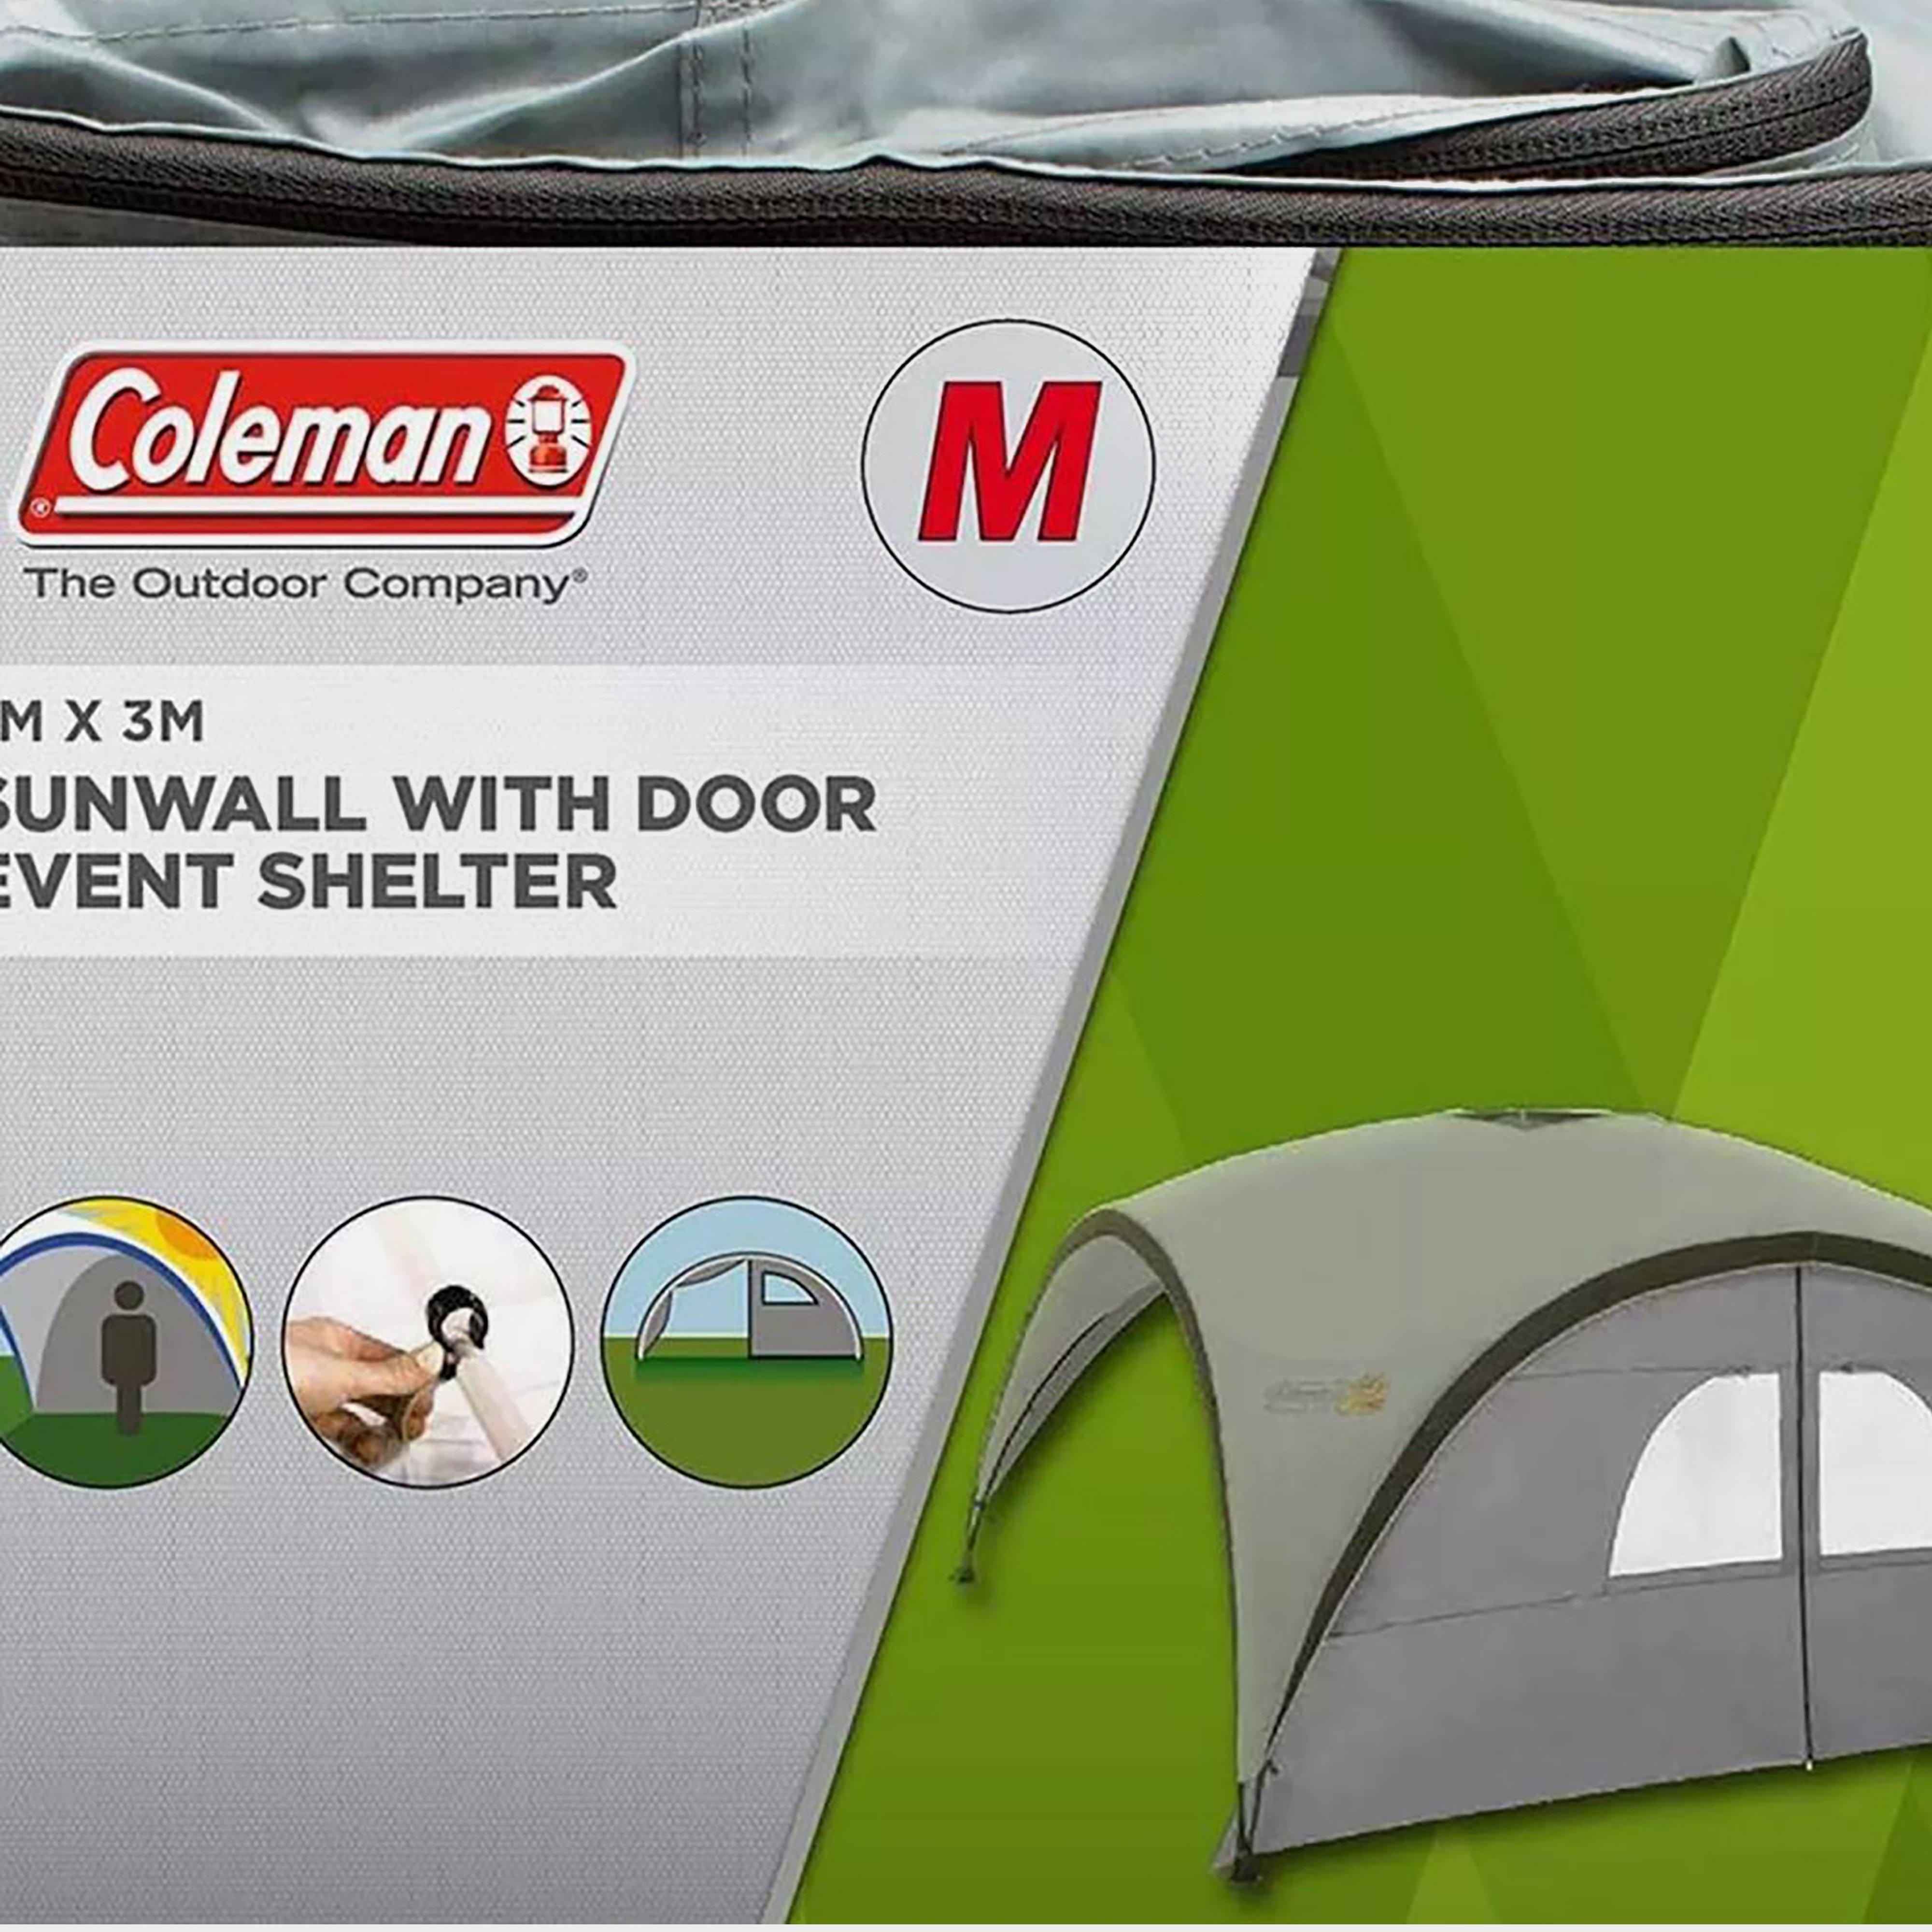 Coleman Fastpitch Event Shelter Pro L Sunwall With Door - White, WHITE